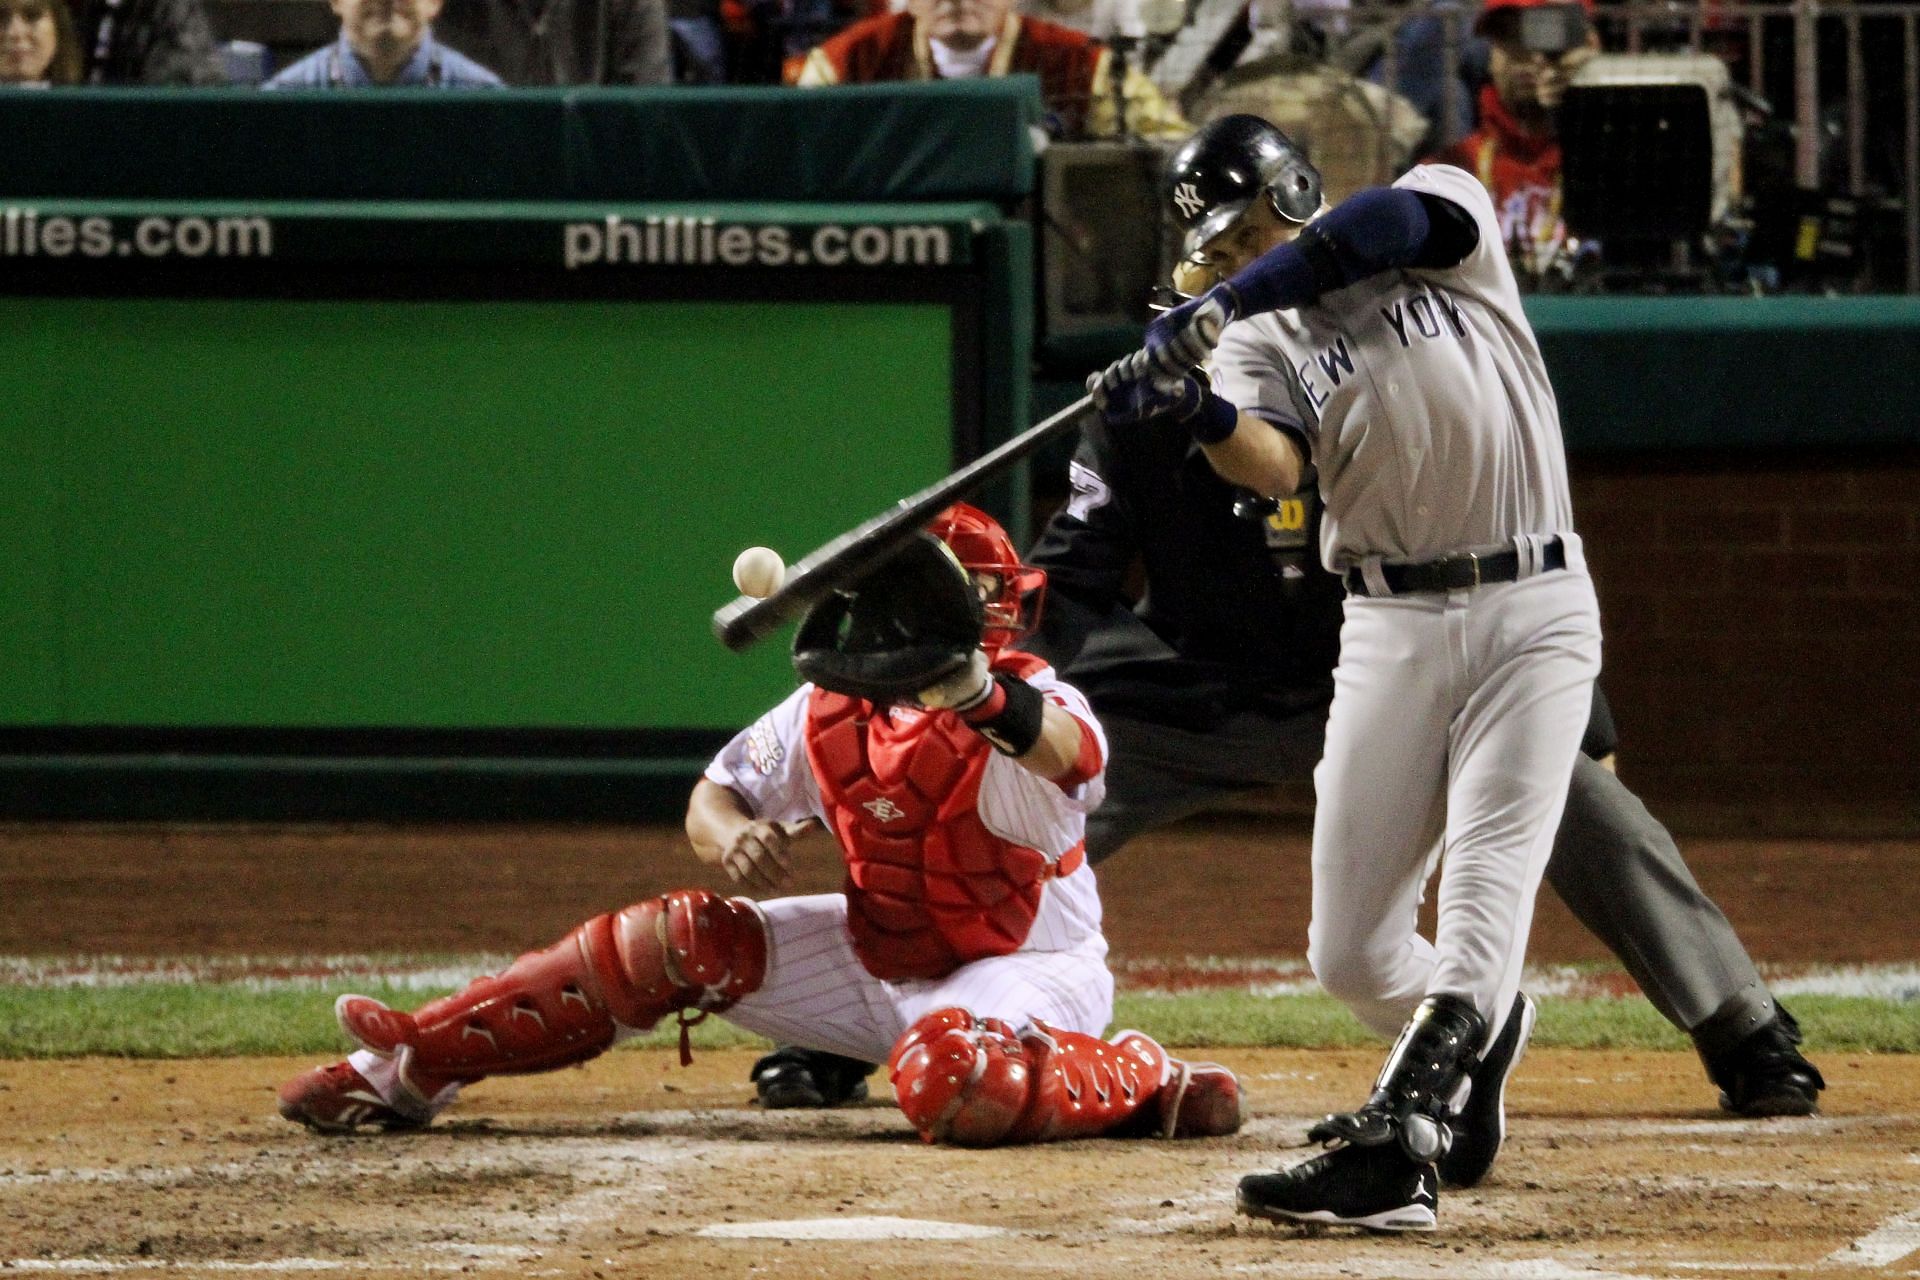 Derek Jeter #2 of the New York Yankees hits a RBI single in the top of the fifth inning against the Philadelphia Phillies in Game Four of the 2009 MLB World Series at Citizens Bank Park on November 1, 2009 in Philadelphia, Pennsylvania.